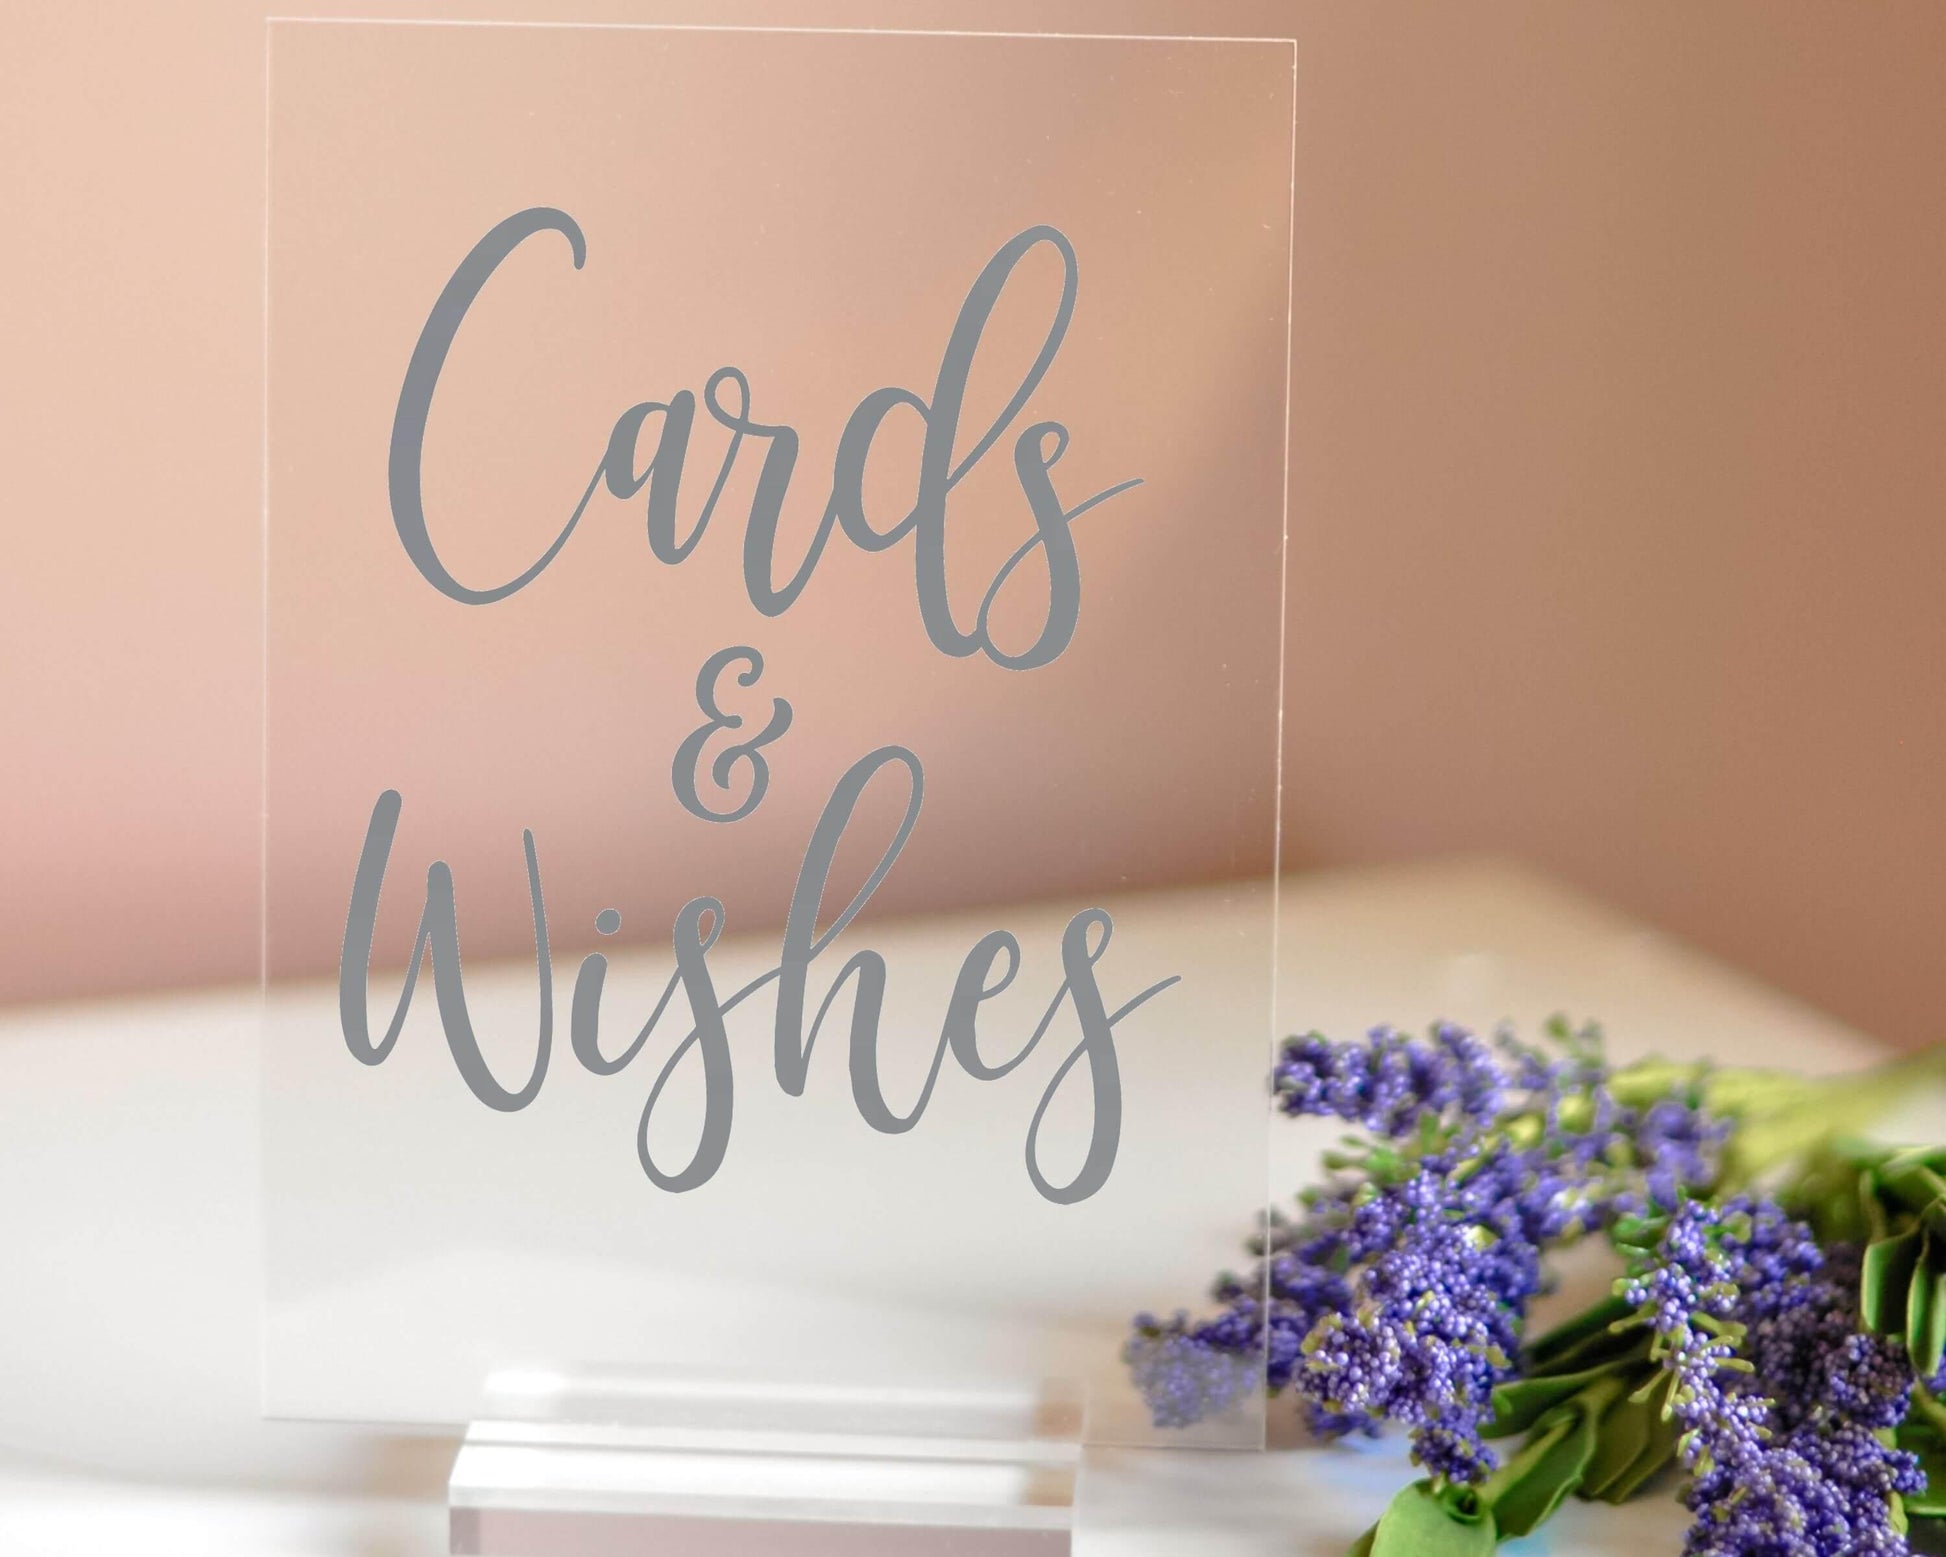 Cards and Wishes Acrylic Sign with Clear Background | 5 X 7" - Crystal Rose Design Co.